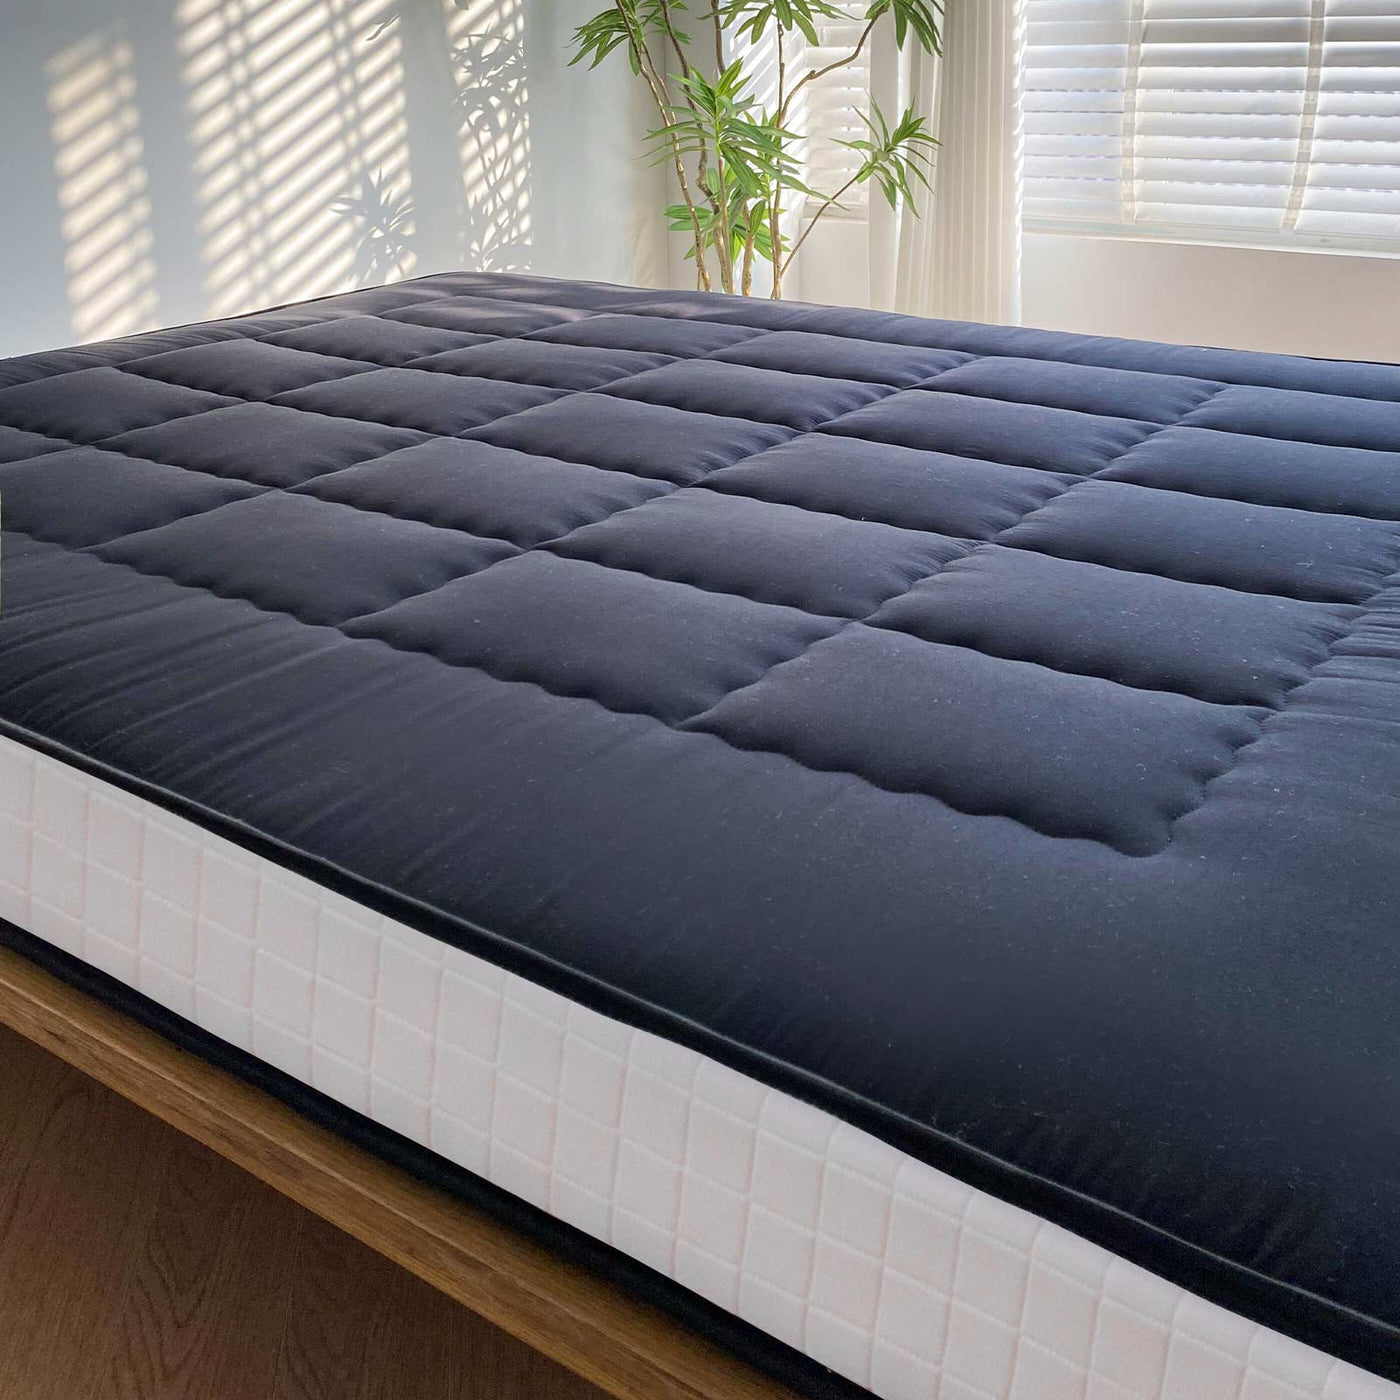 MAXYOYO 6" Extra Thick Japanese Futon Mattress with Rectangle Quilting, Stylish Floor Bed For Family, Black